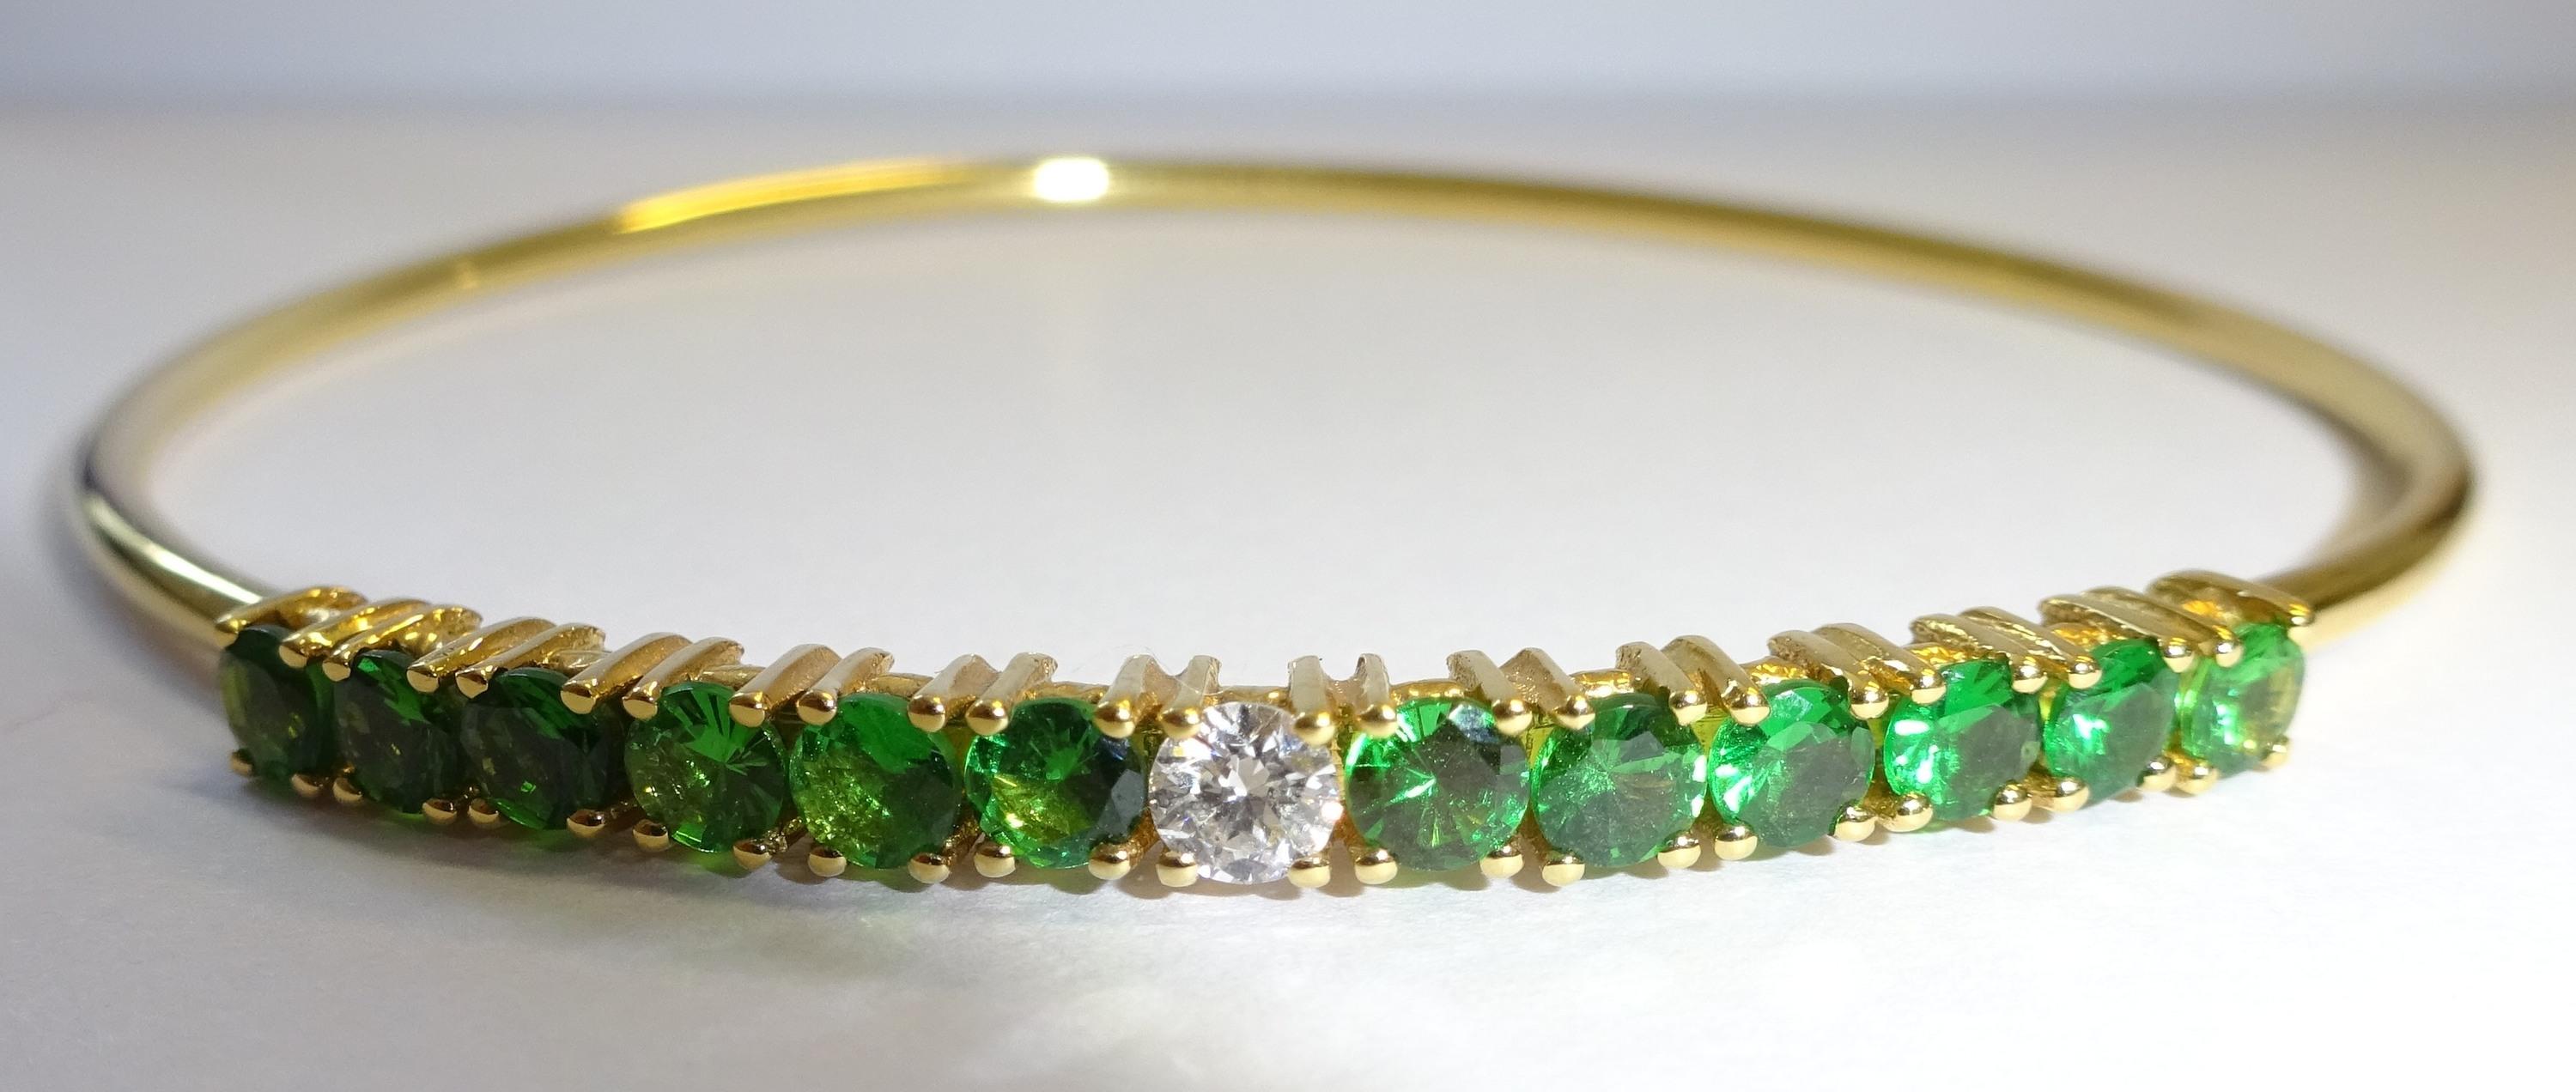 18 Karat Yelow Gold Diamond and Tsavorite Bracelet

1Diamonds 0.12Carat H SI
12 Tsavorite 1.42Carat
5,7 x 5.0 cm


Founded in 1974, Gianni Lazzaro is a family-owned jewelry company based out of Düsseldorf, Germany.
Although rooted in Germany, Gianni